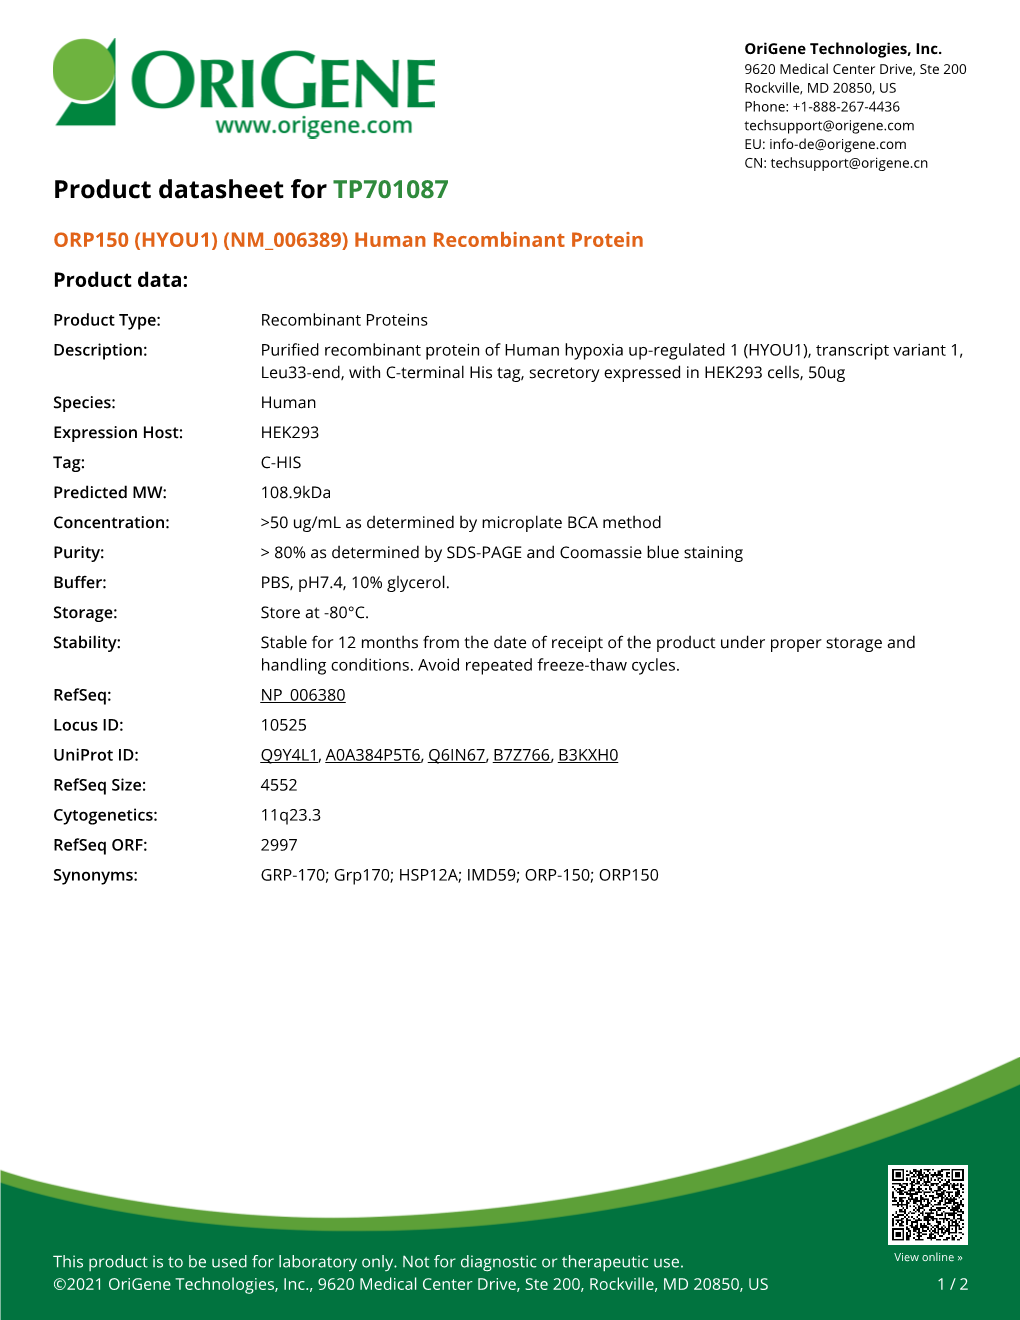 ORP150 (HYOU1) (NM 006389) Human Recombinant Protein Product Data